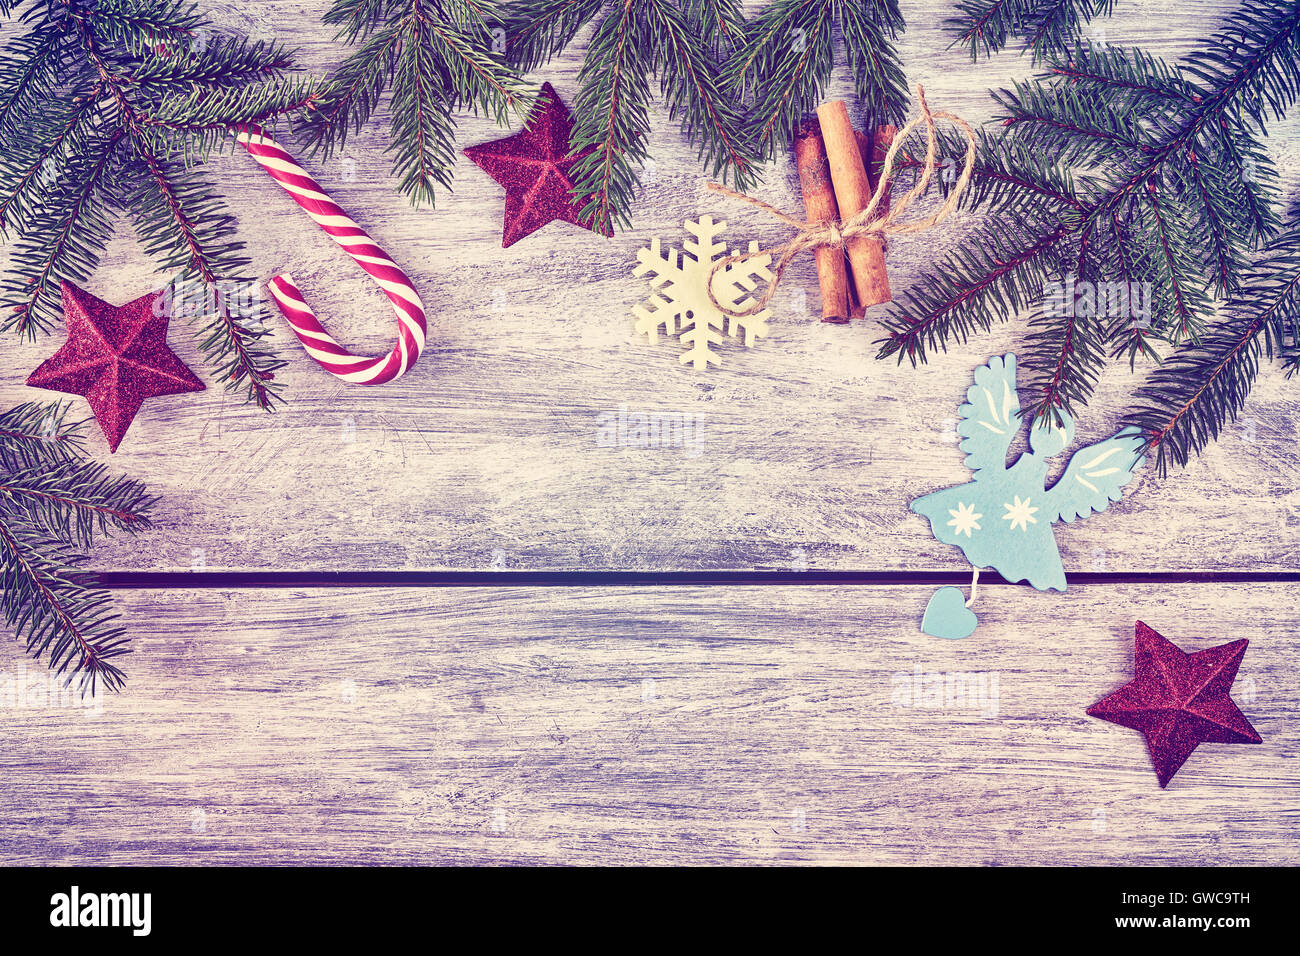 Hình nền Giáng sinh cổ điển: From the decorated trees to the warm glow of the fire, there\'s nothing quite like a classic Christmas scene. Add some holiday spirit to your device with a vintage Christmas wallpaper that brings the nostalgia of the season to life.